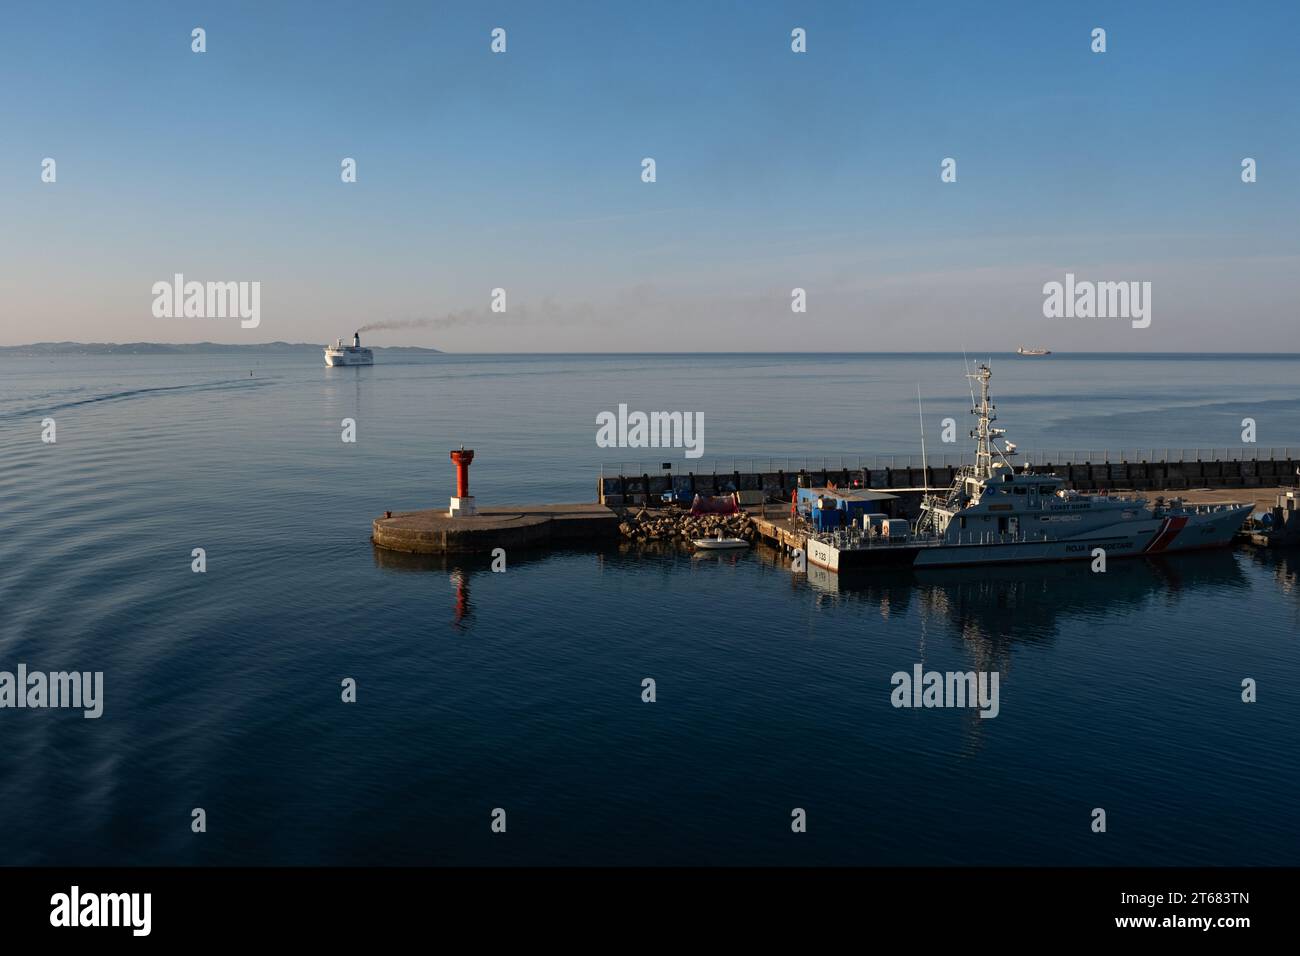 An early morning arrival at Dürres port in Albania Stock Photo